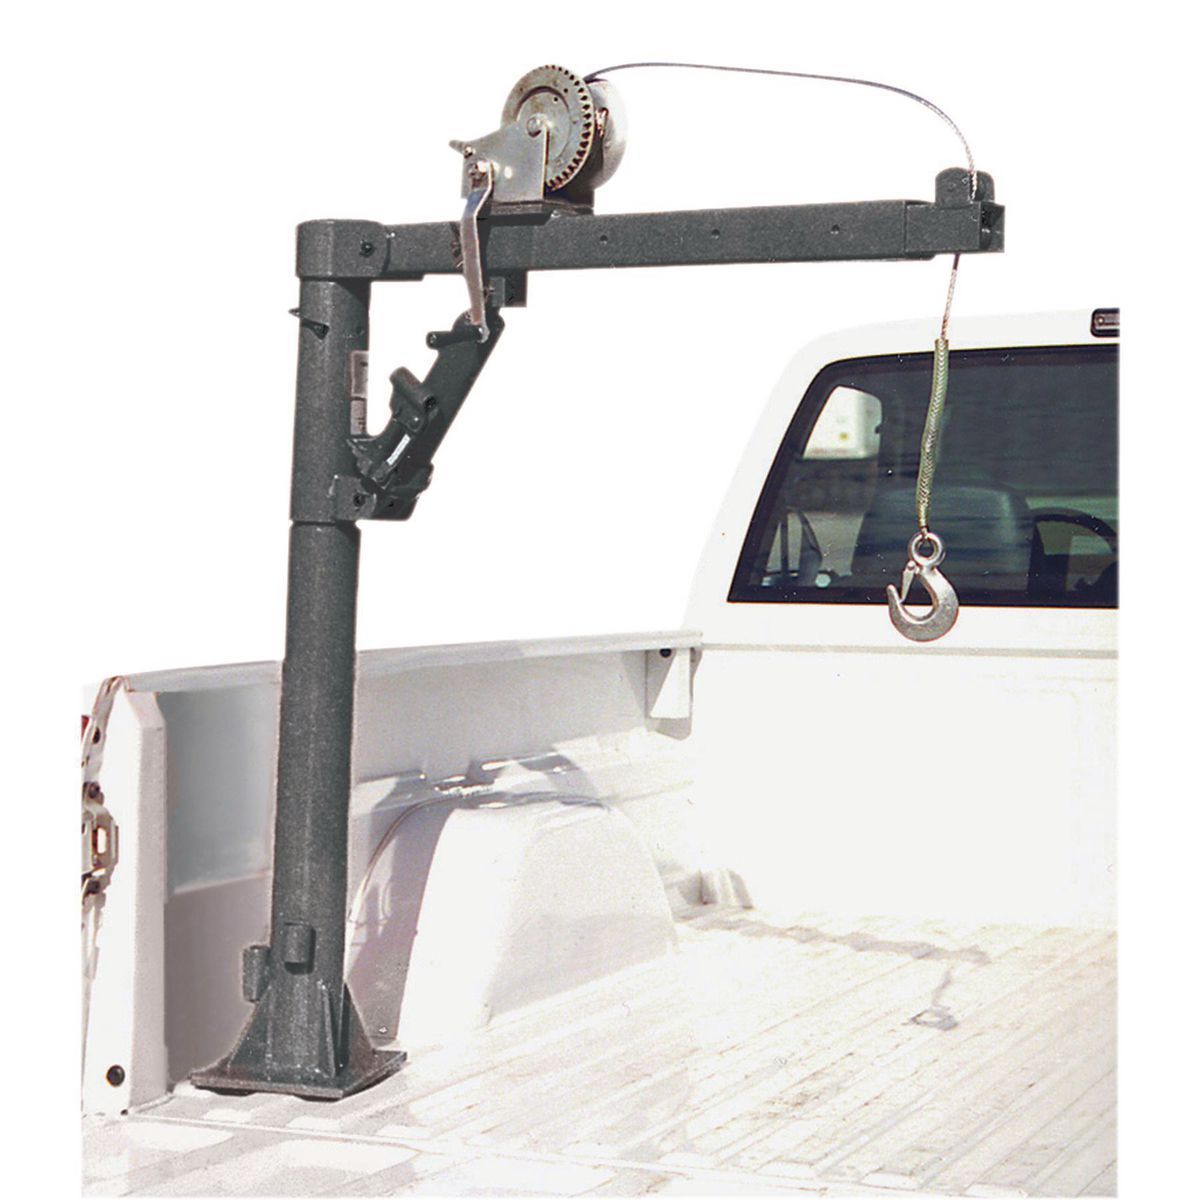 HAUL-MASTER 1/2 Ton Capacity Pickup Truck Bed Crane with Hand Winch